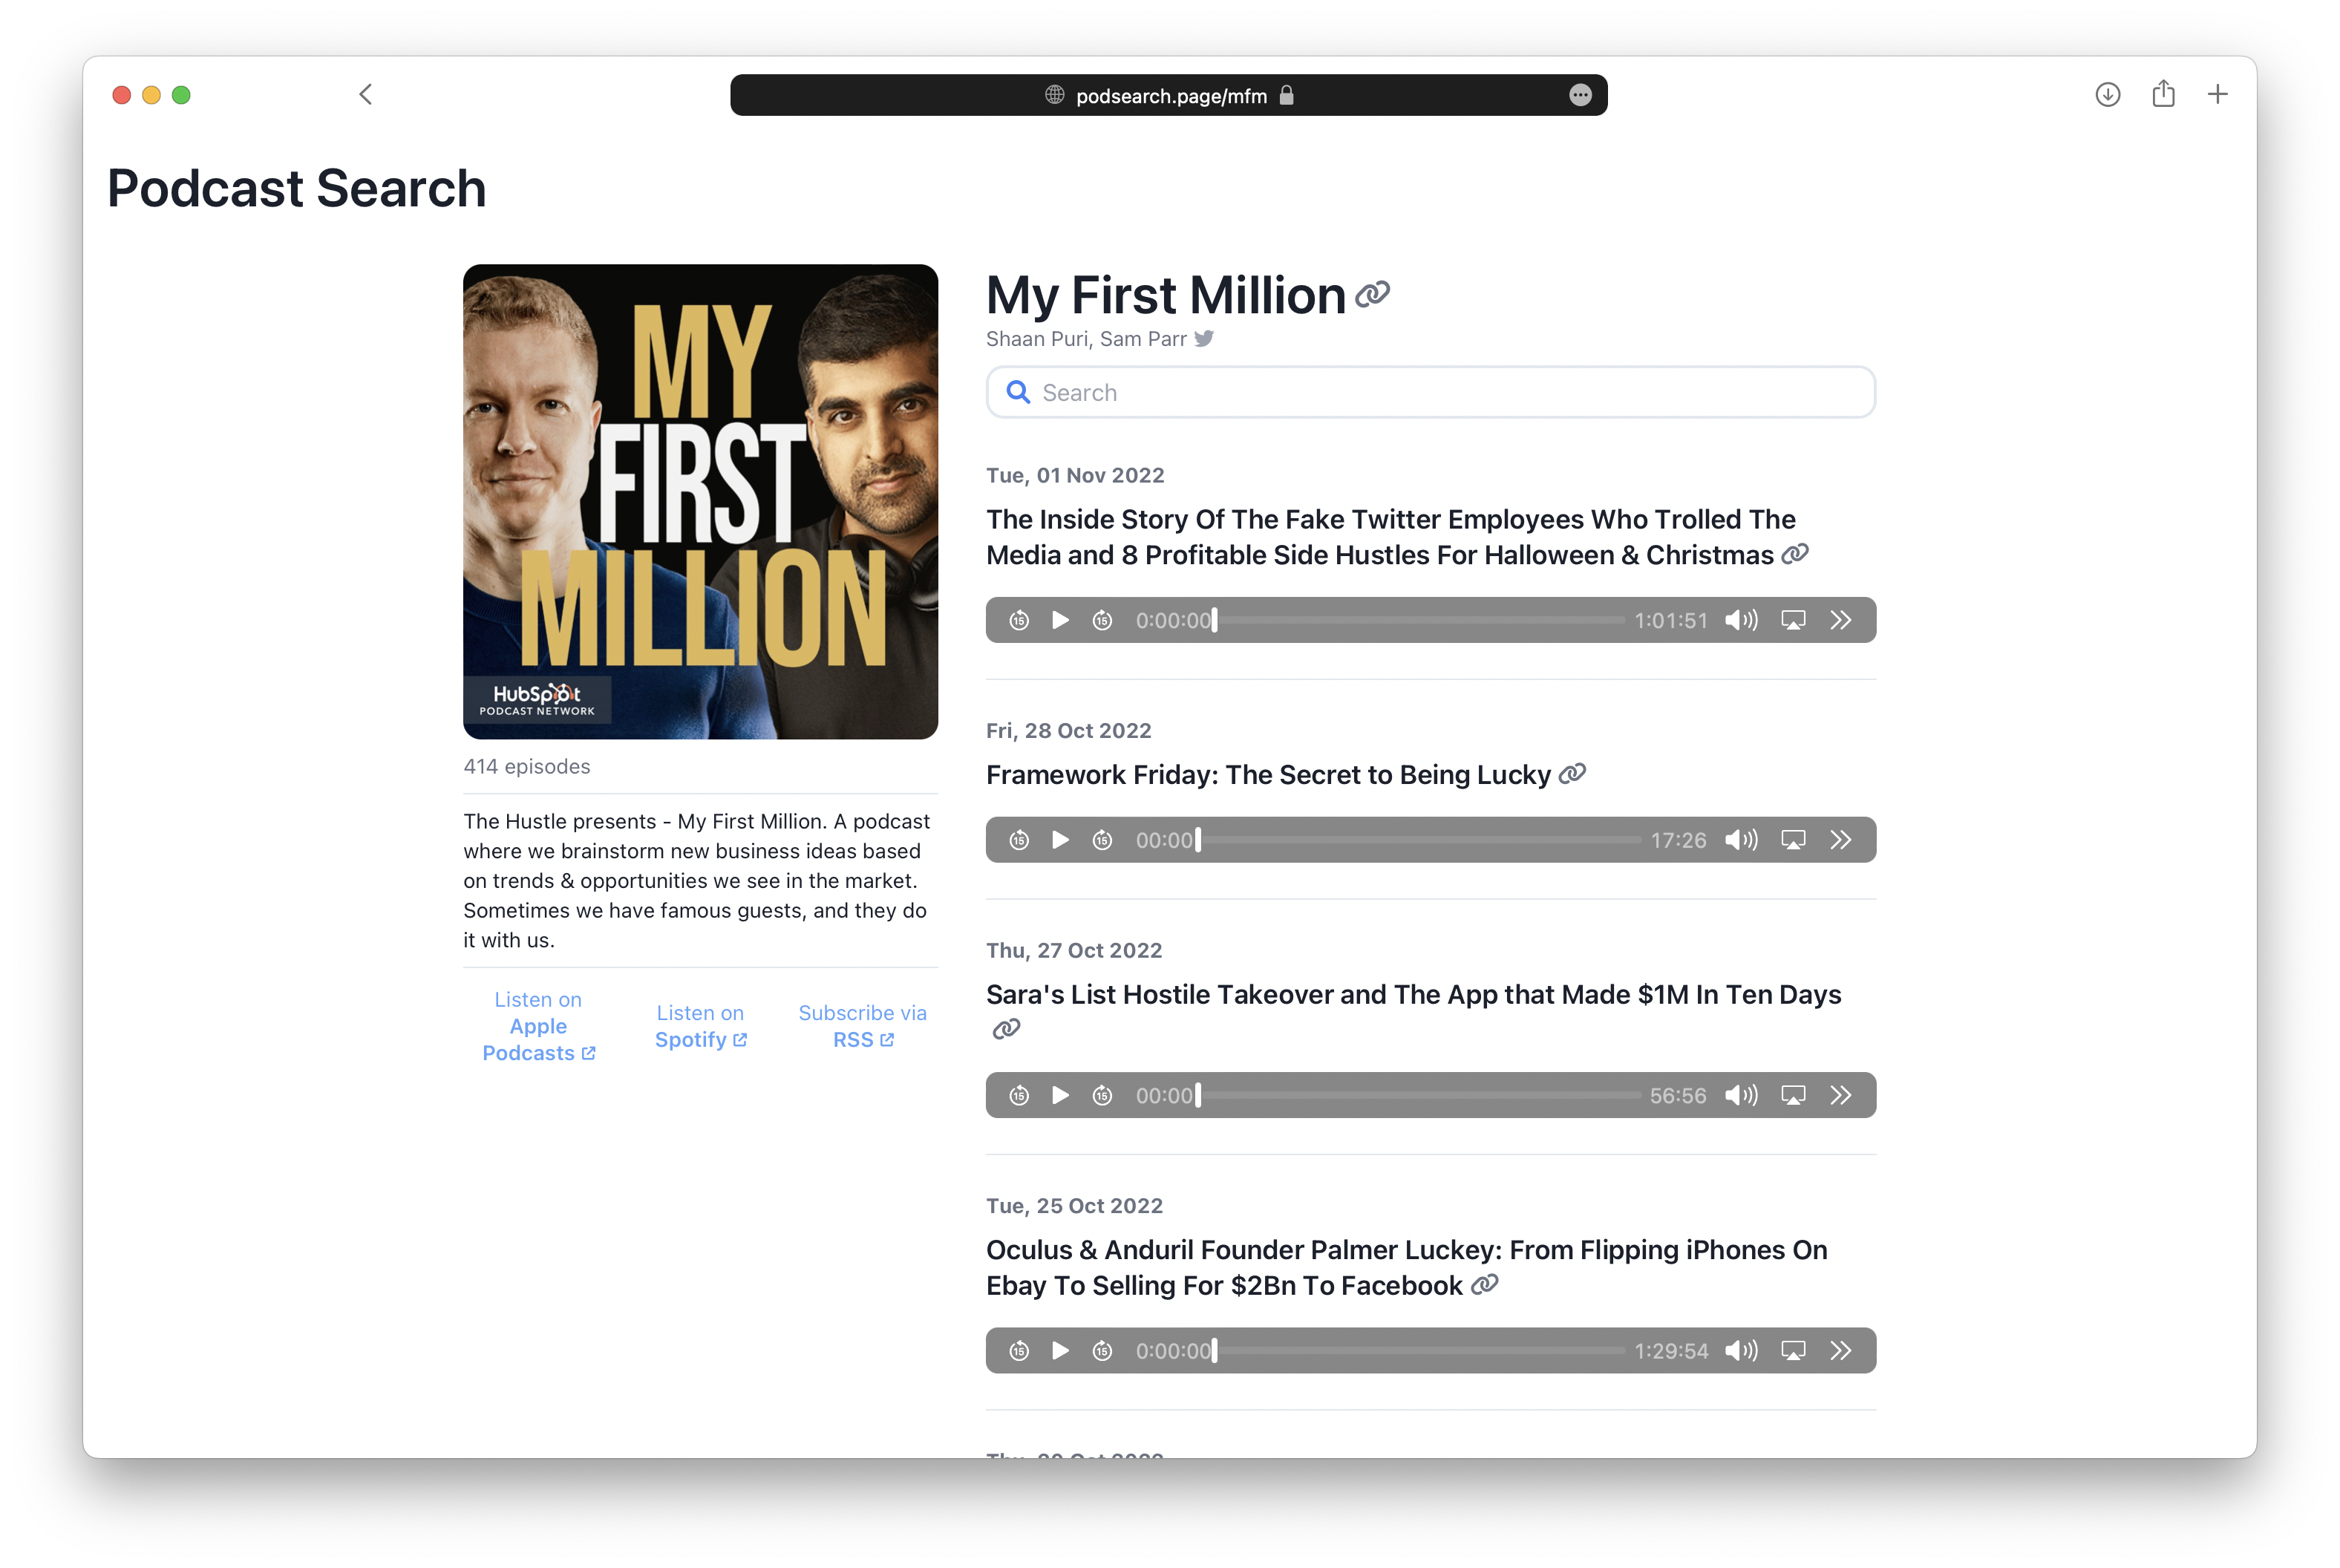 My First Million Podcast Search